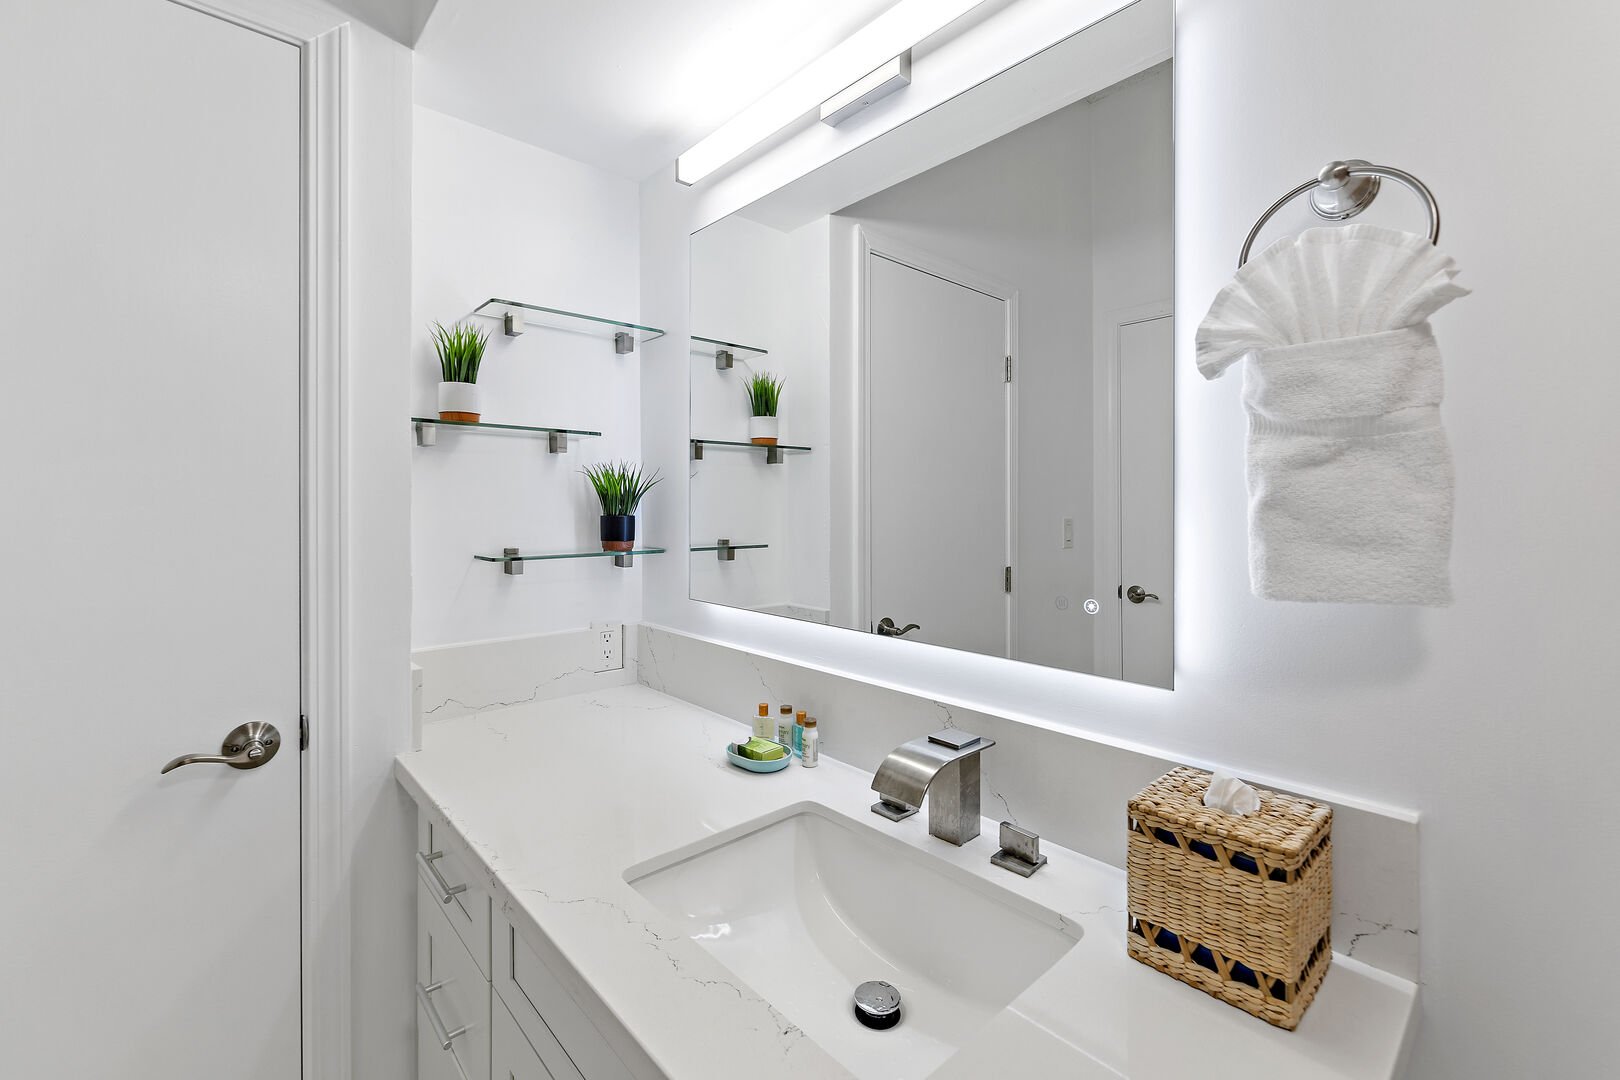 Well-lit bathroom with plenty of storage space for toiletries